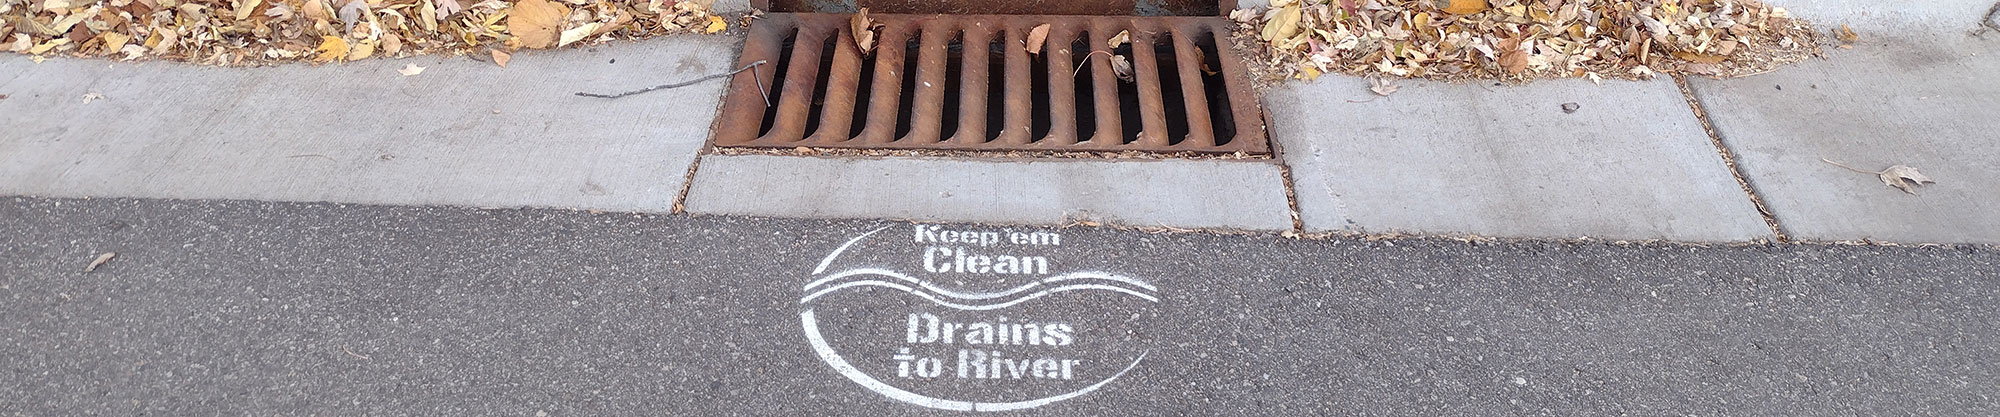 Storm drain with text "Keep 'em clean. Drains to river."